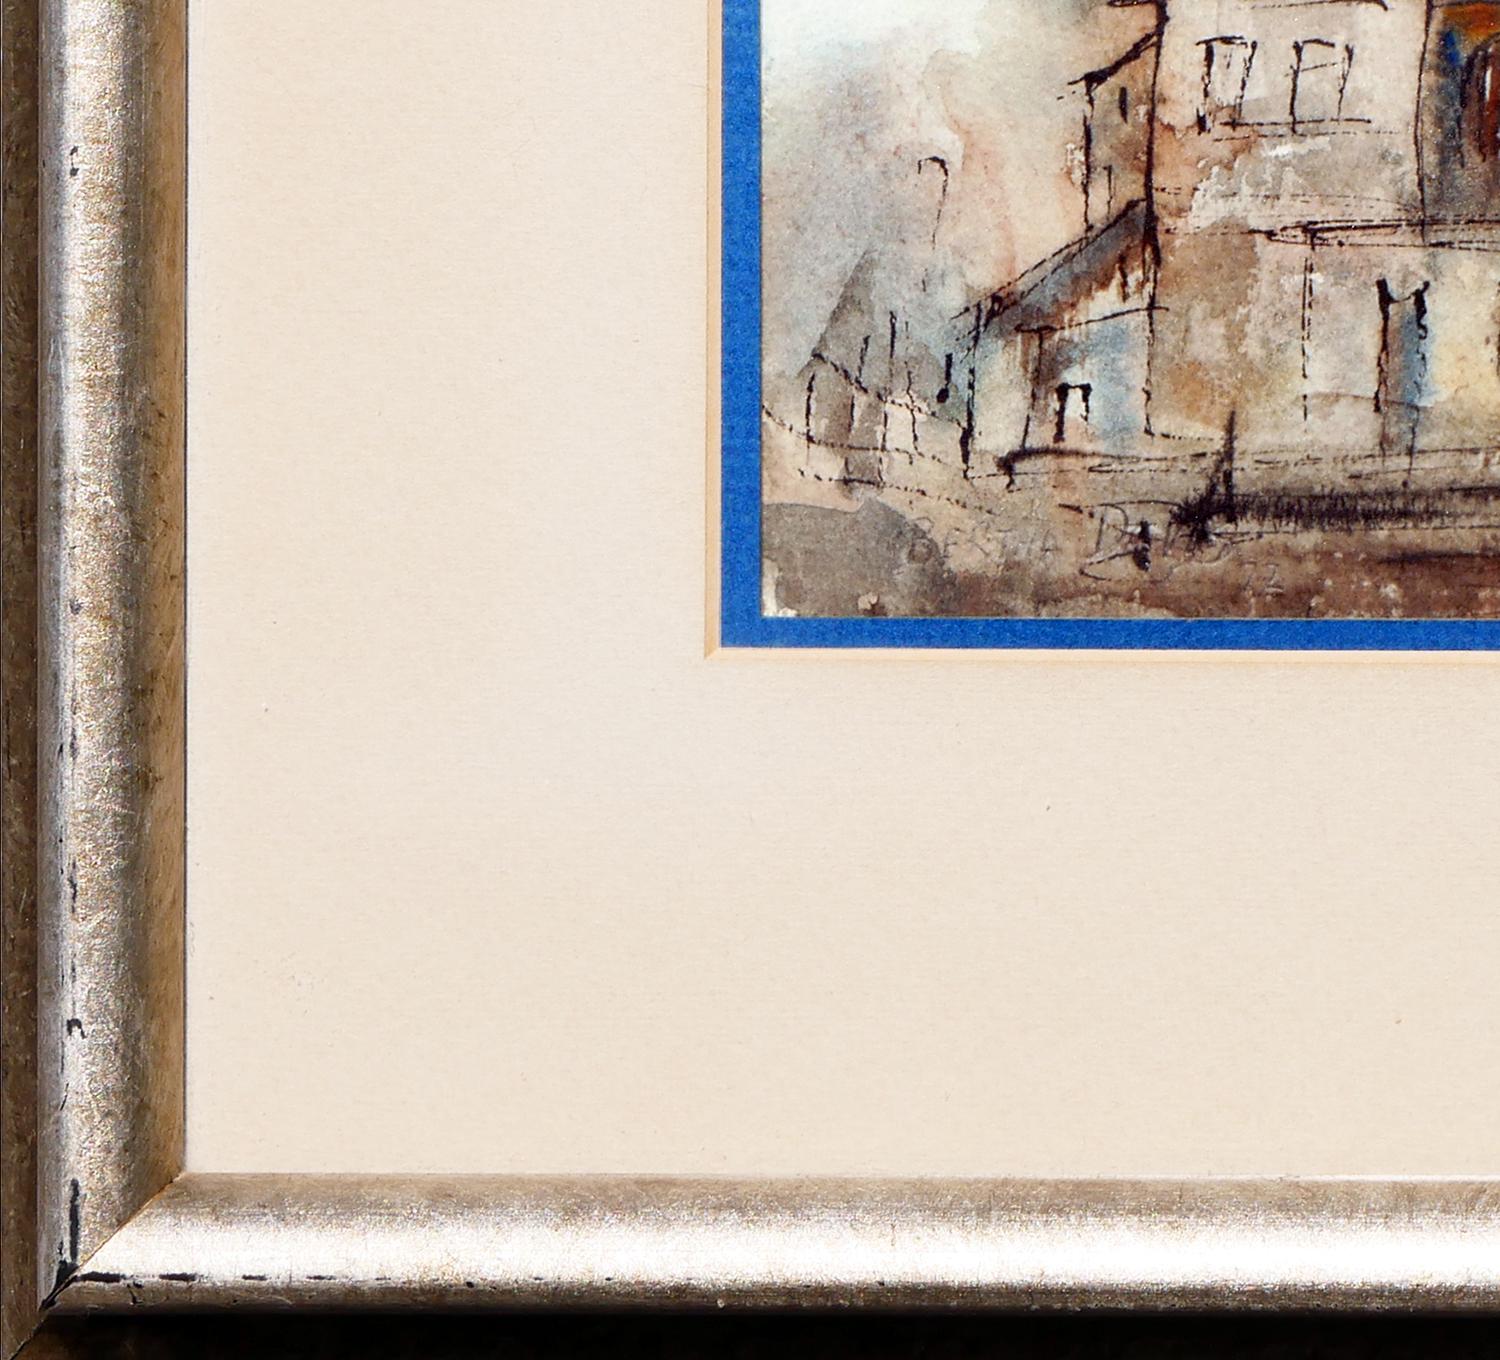 Modern abstract watercolor drawing of a house by Texas artist Bertha Davis. The work features a loosely rendered neutral-toned depiction of a spacious house with blue accents. Signed and dated by the artist in the front lower left corner. Currently